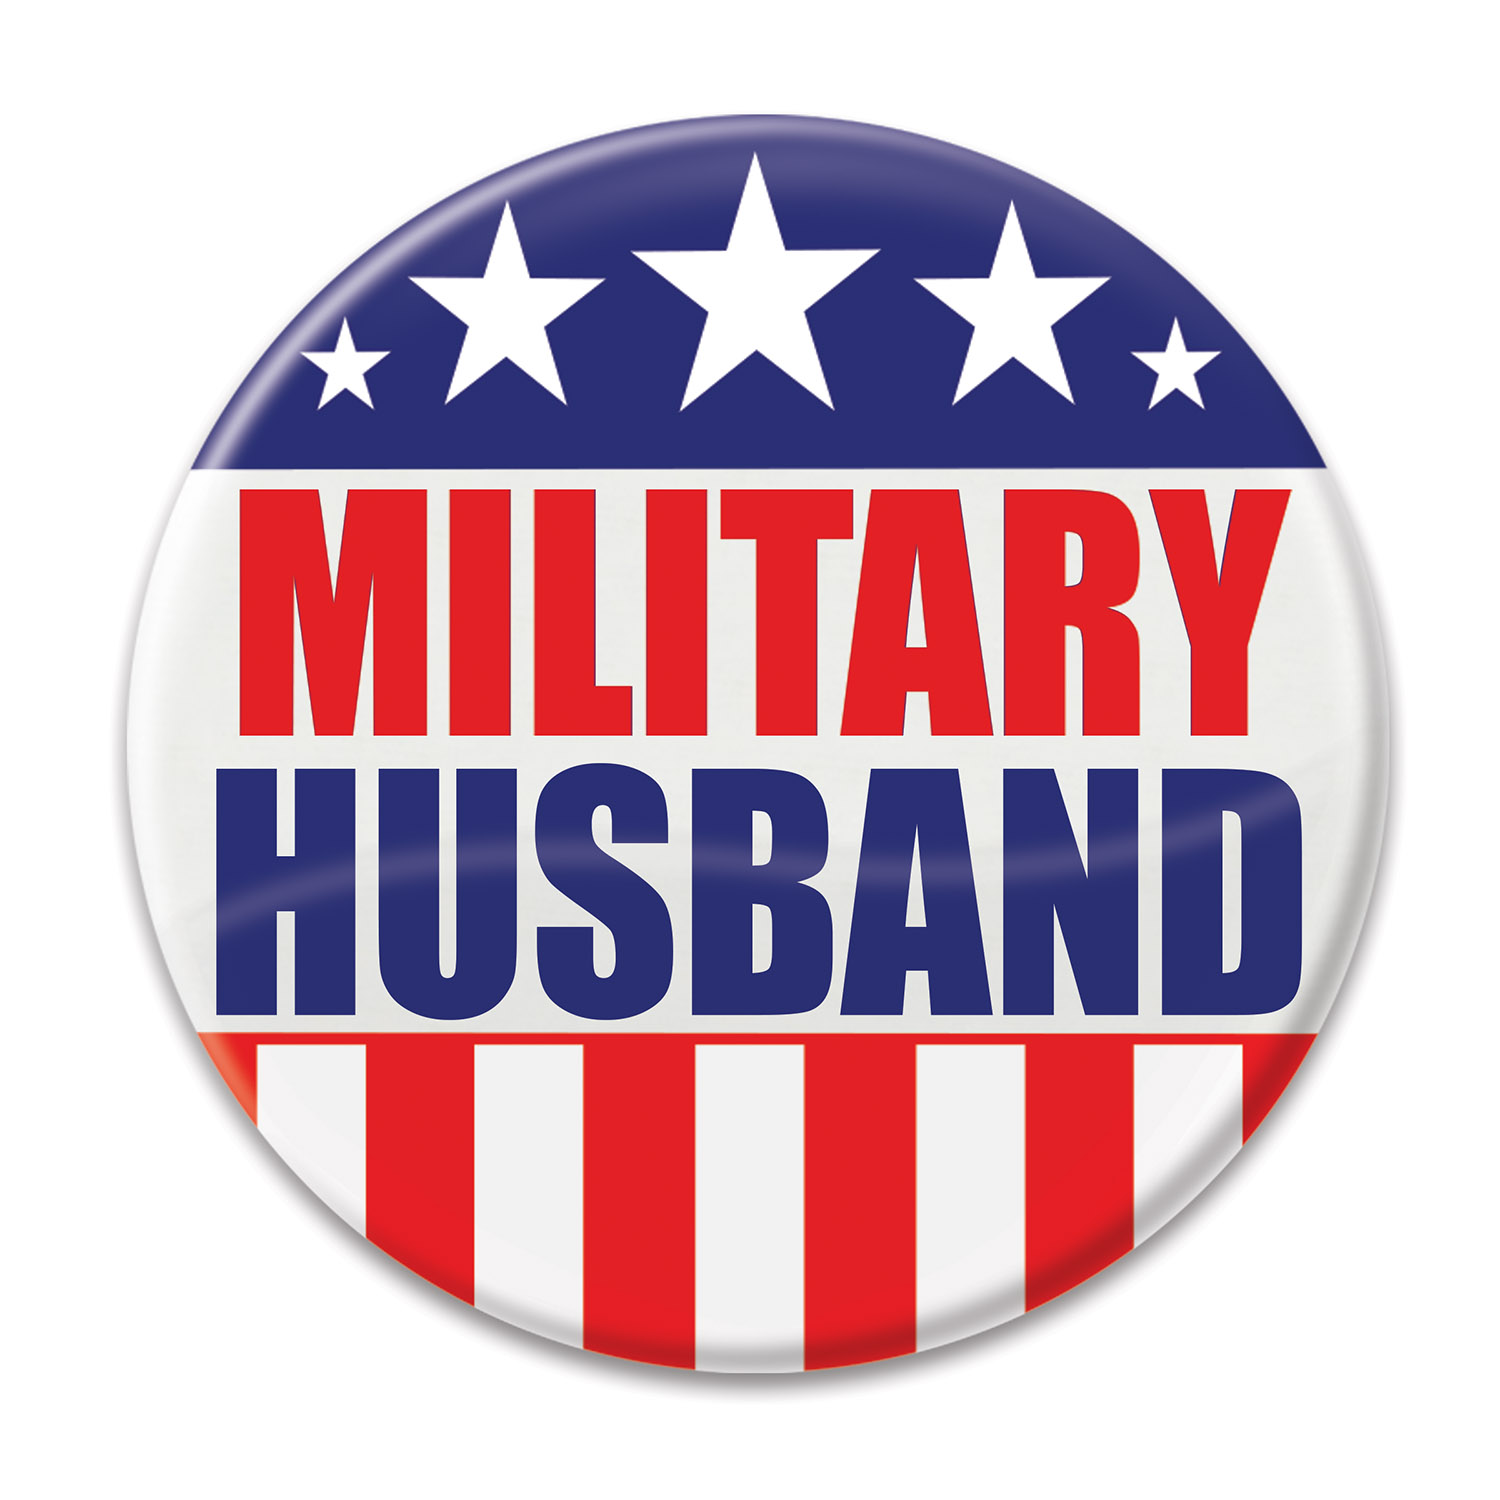 MILITARY HUSBAND BUTTON (6) image